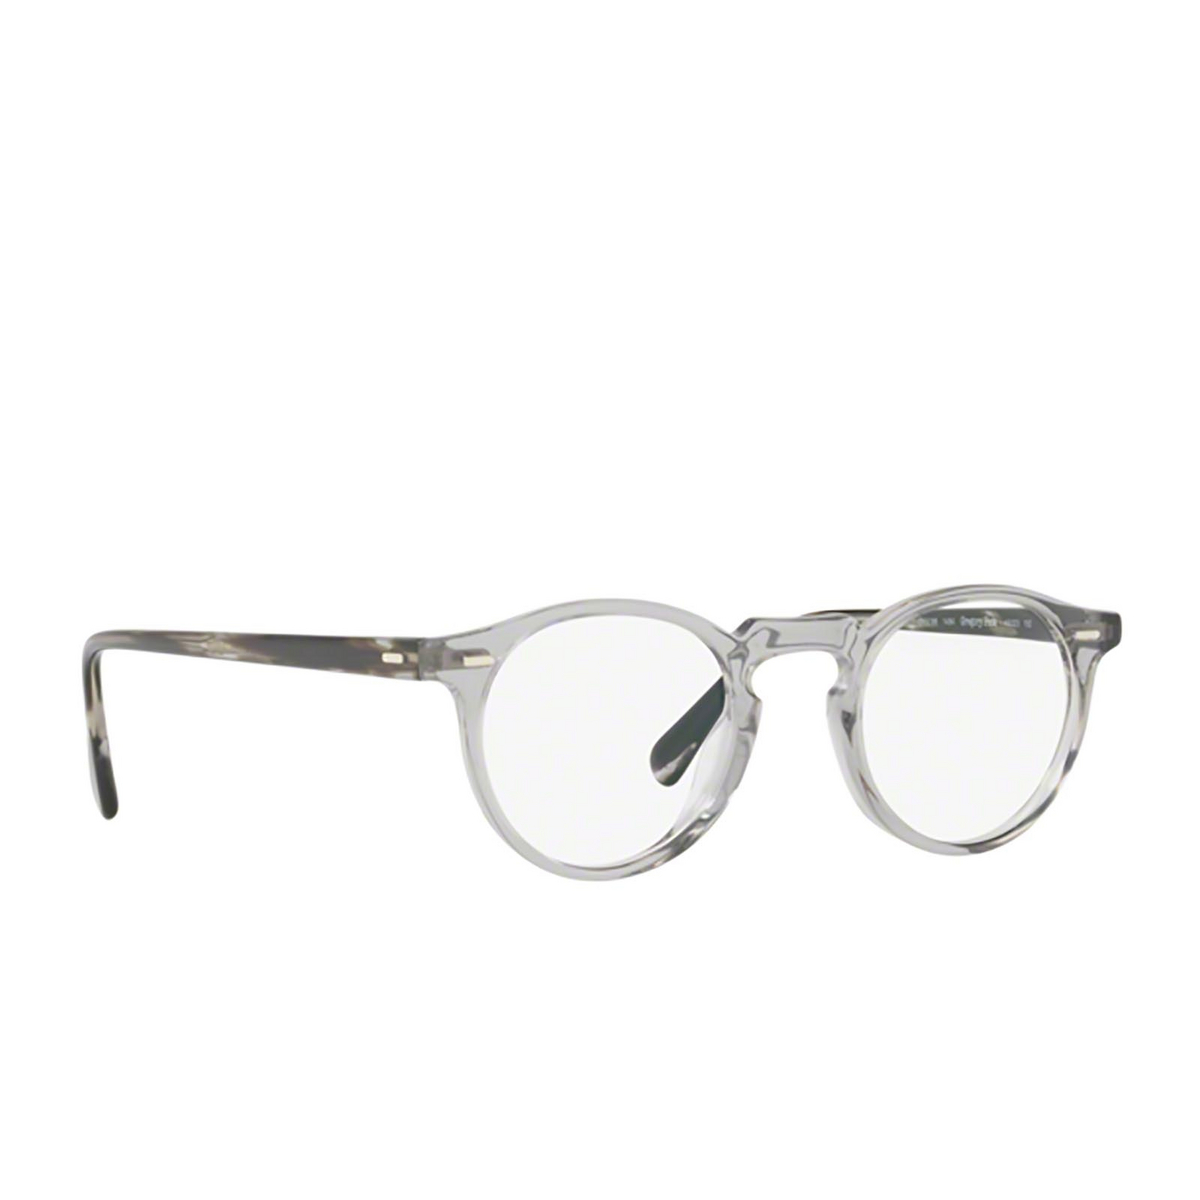 Oliver Peoples GREGORY PECK Eyeglasses 1484 Workman Grey - three-quarters view